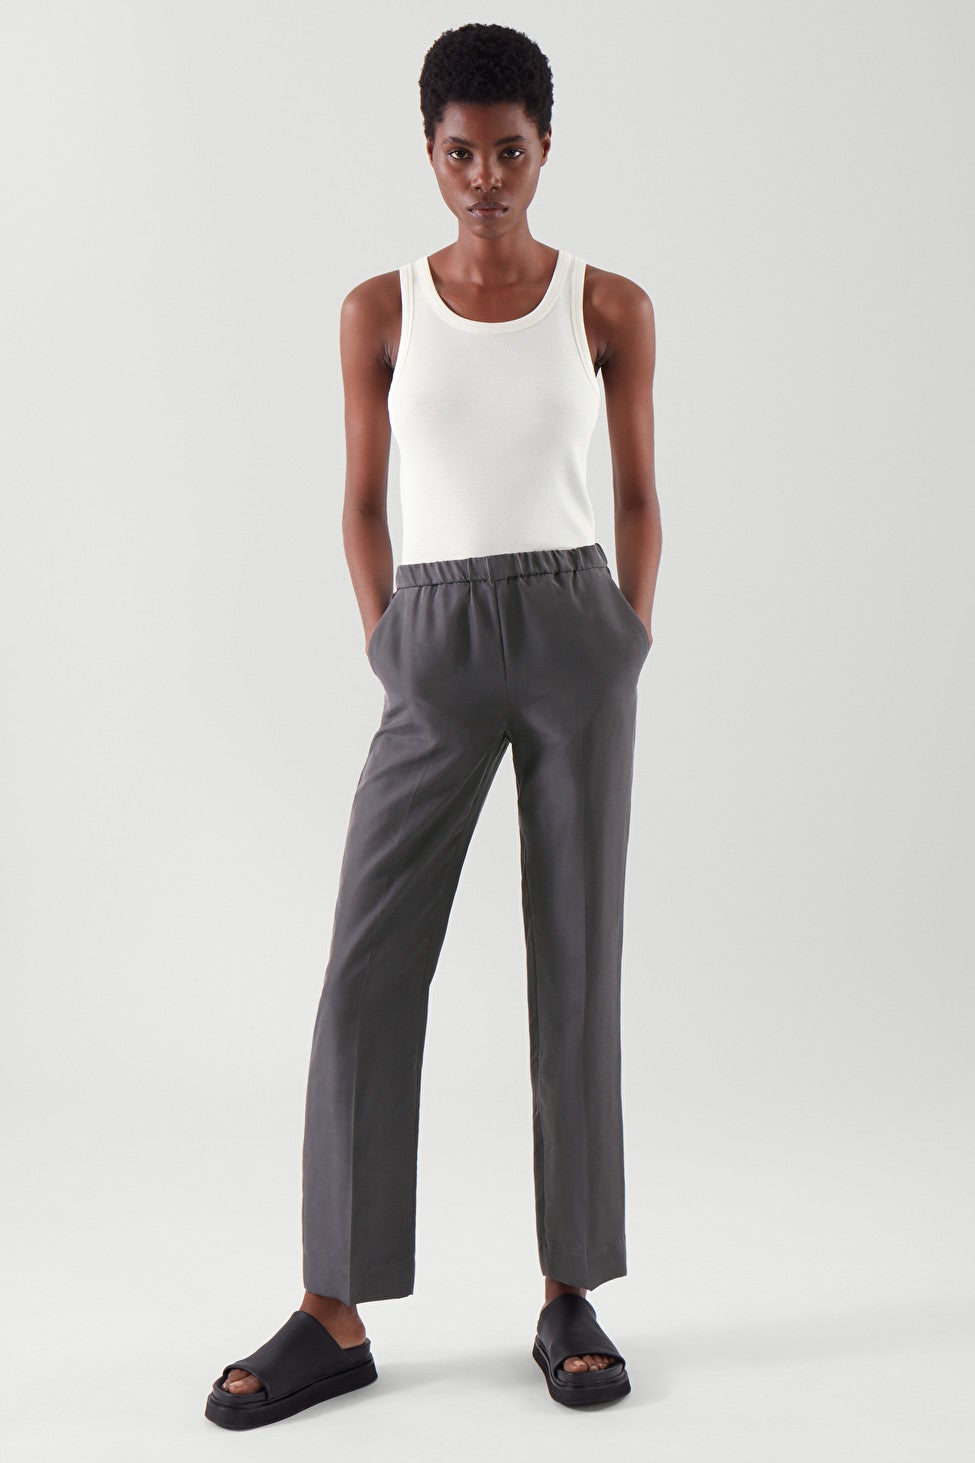 Taffeta Silk Pant with Cotton Lining Pants for Womens Side Slit and Both  Side Pockets Pack of 1Grey Color